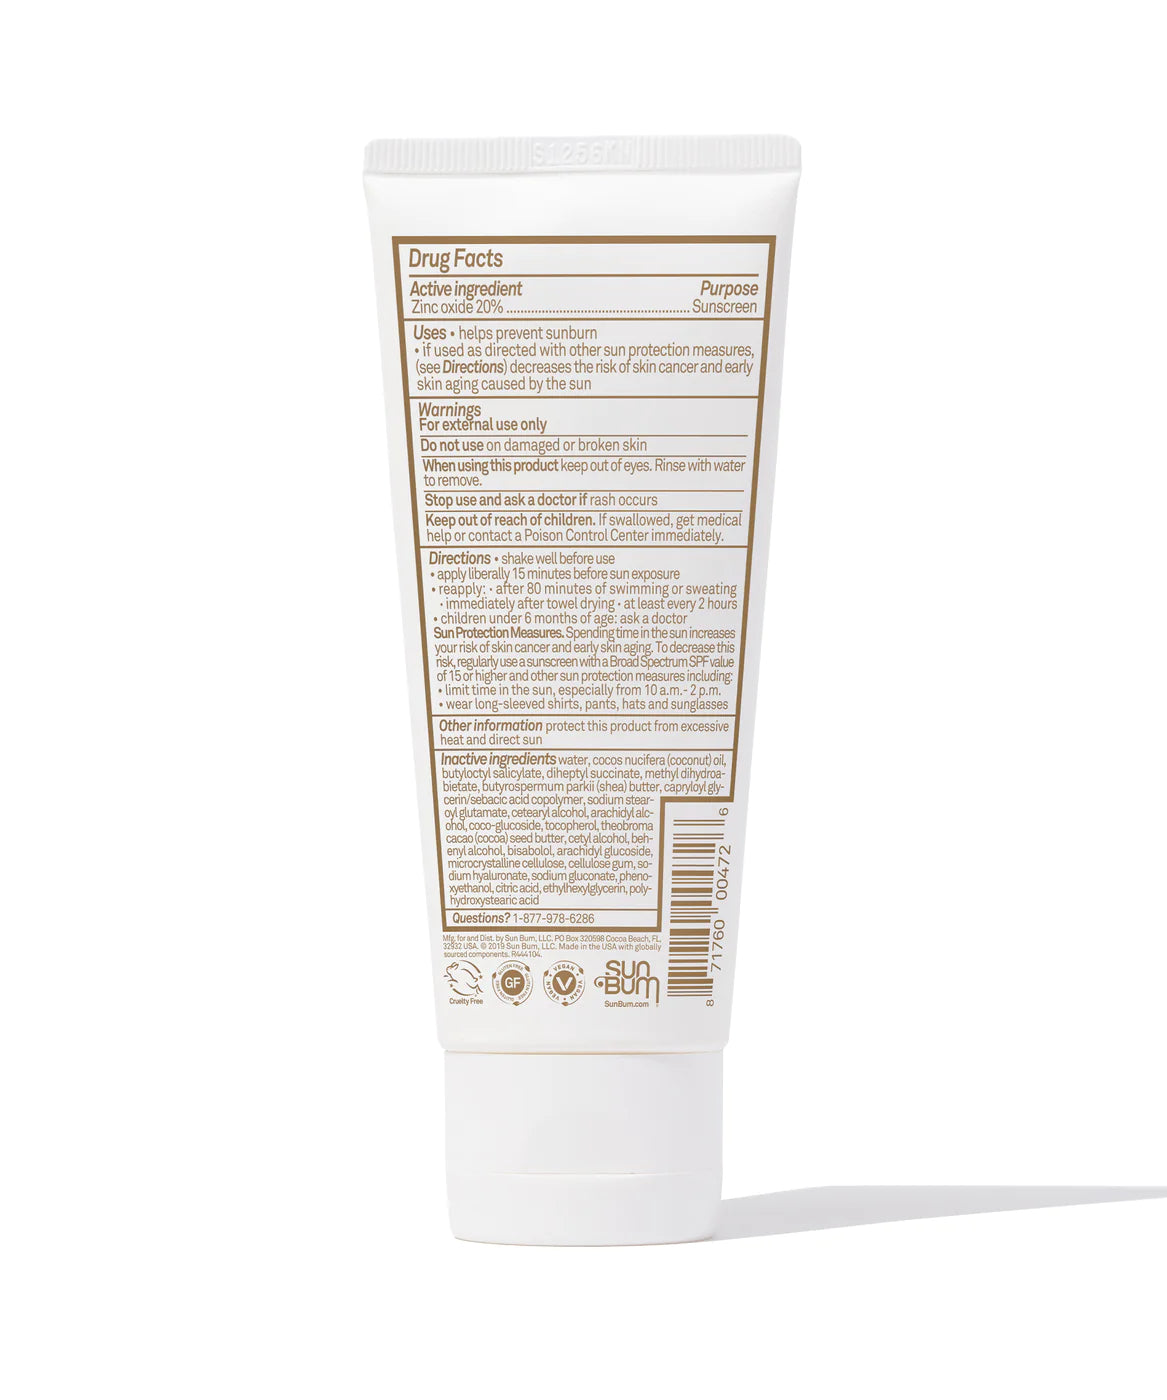 Mineral Sunscreen Lotion - SPF 50 - 3 oz